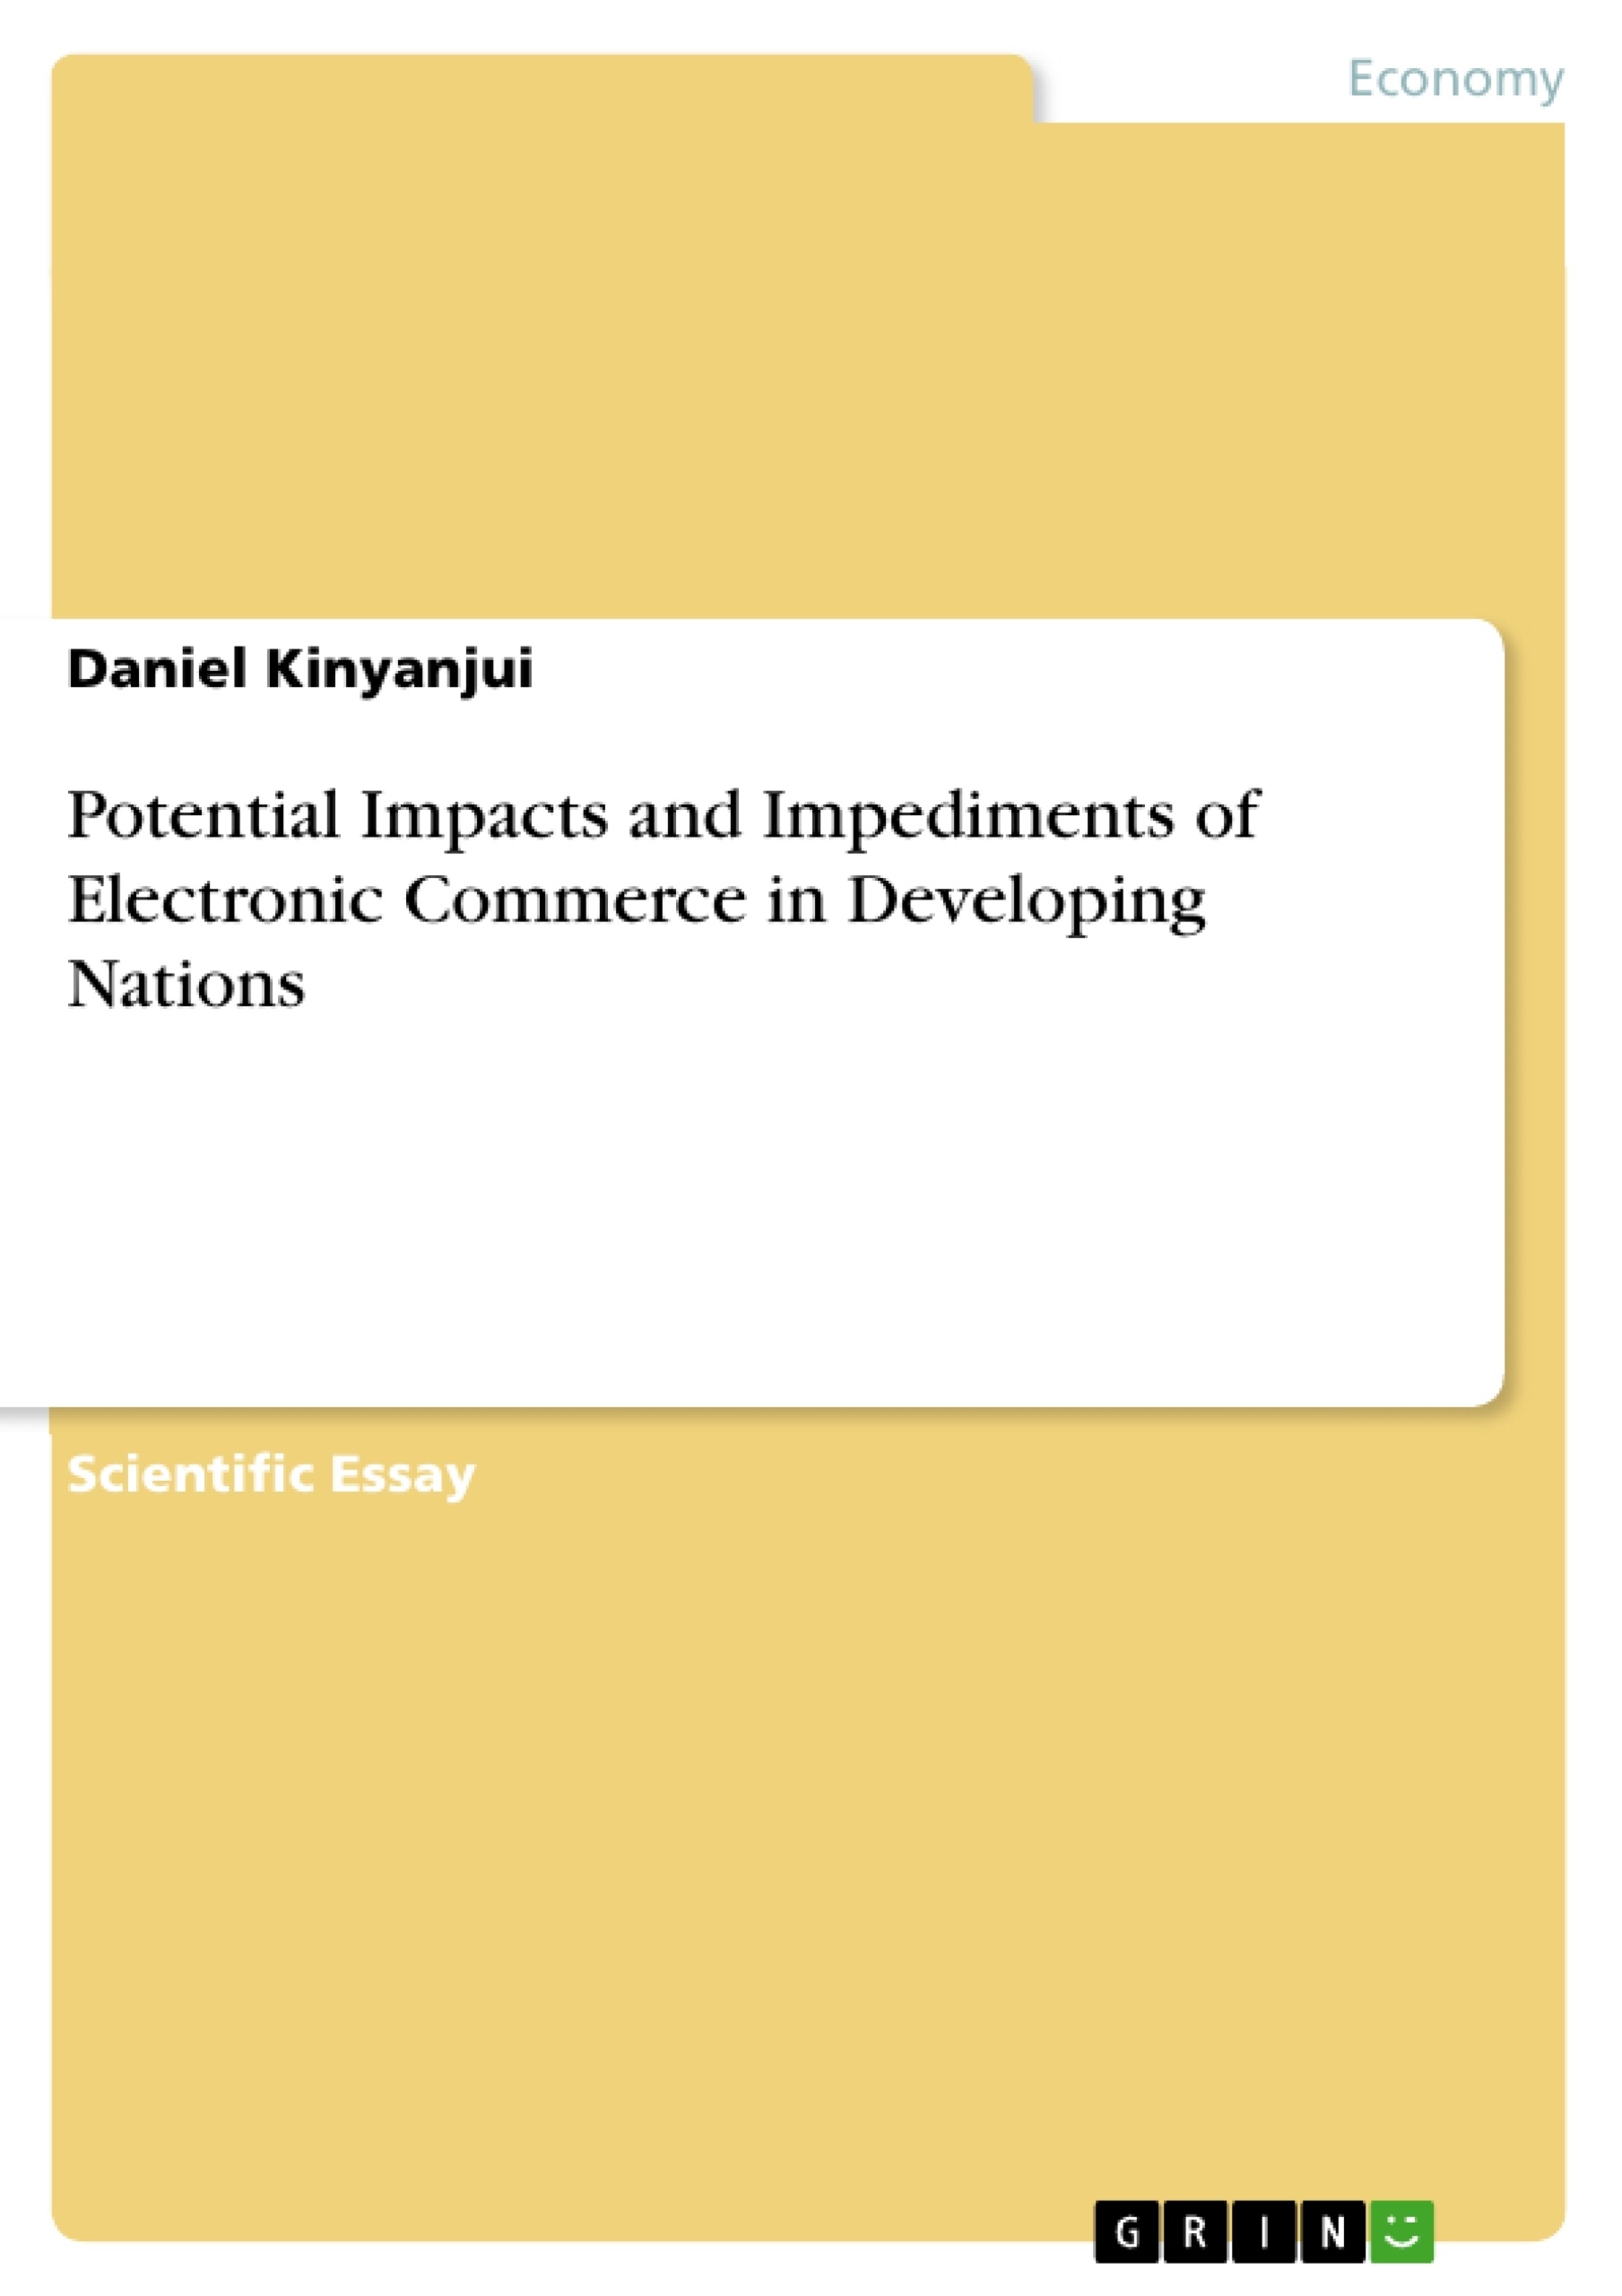 Título: Potential Impacts and Impediments of Electronic Commerce in Developing Nations